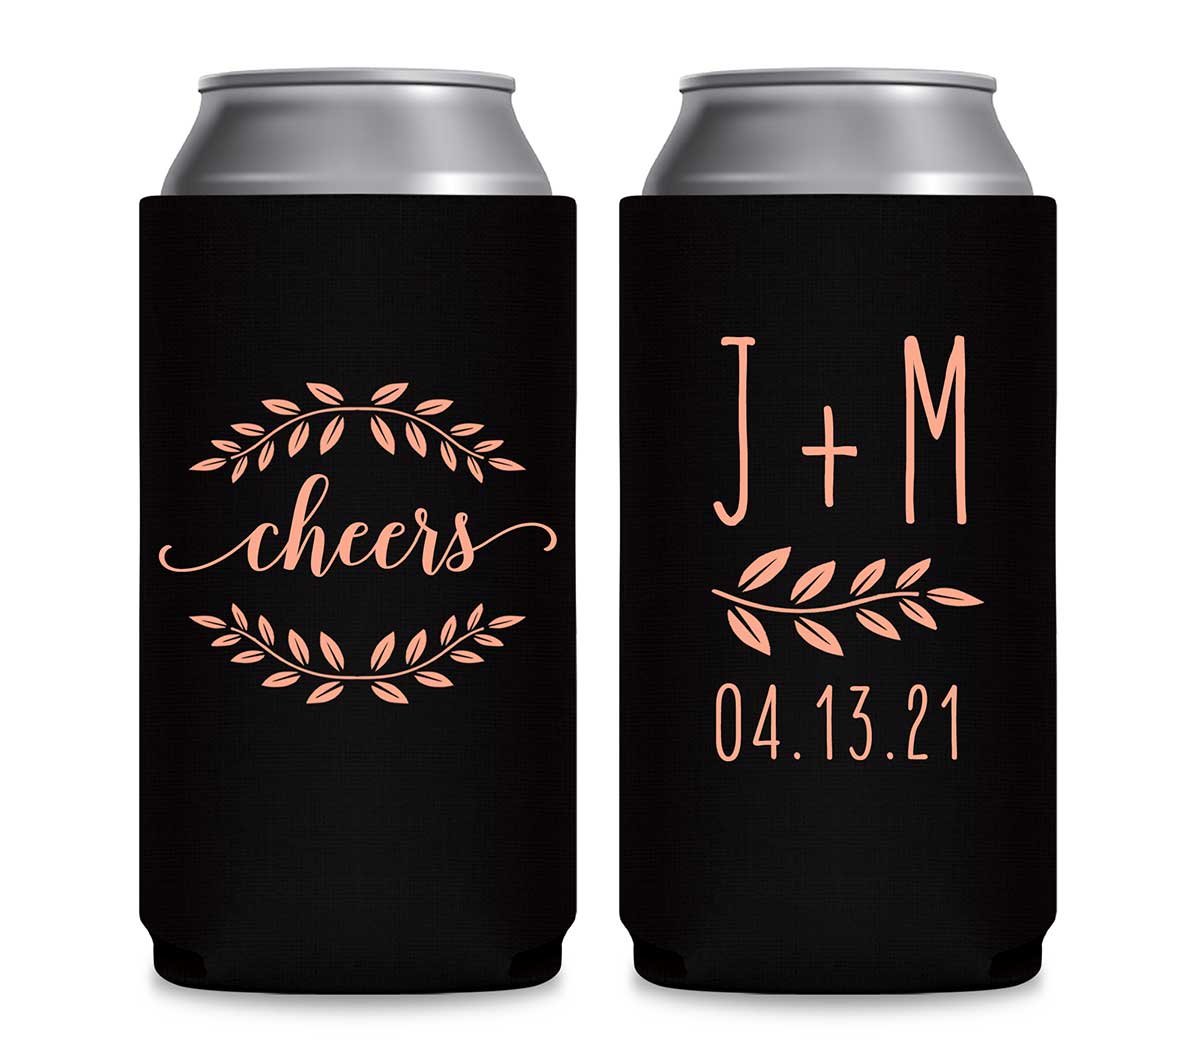 Cheers 4A Wedding Wreath Foldable 12 oz Slim Can Koozies Wedding Gifts for Guests